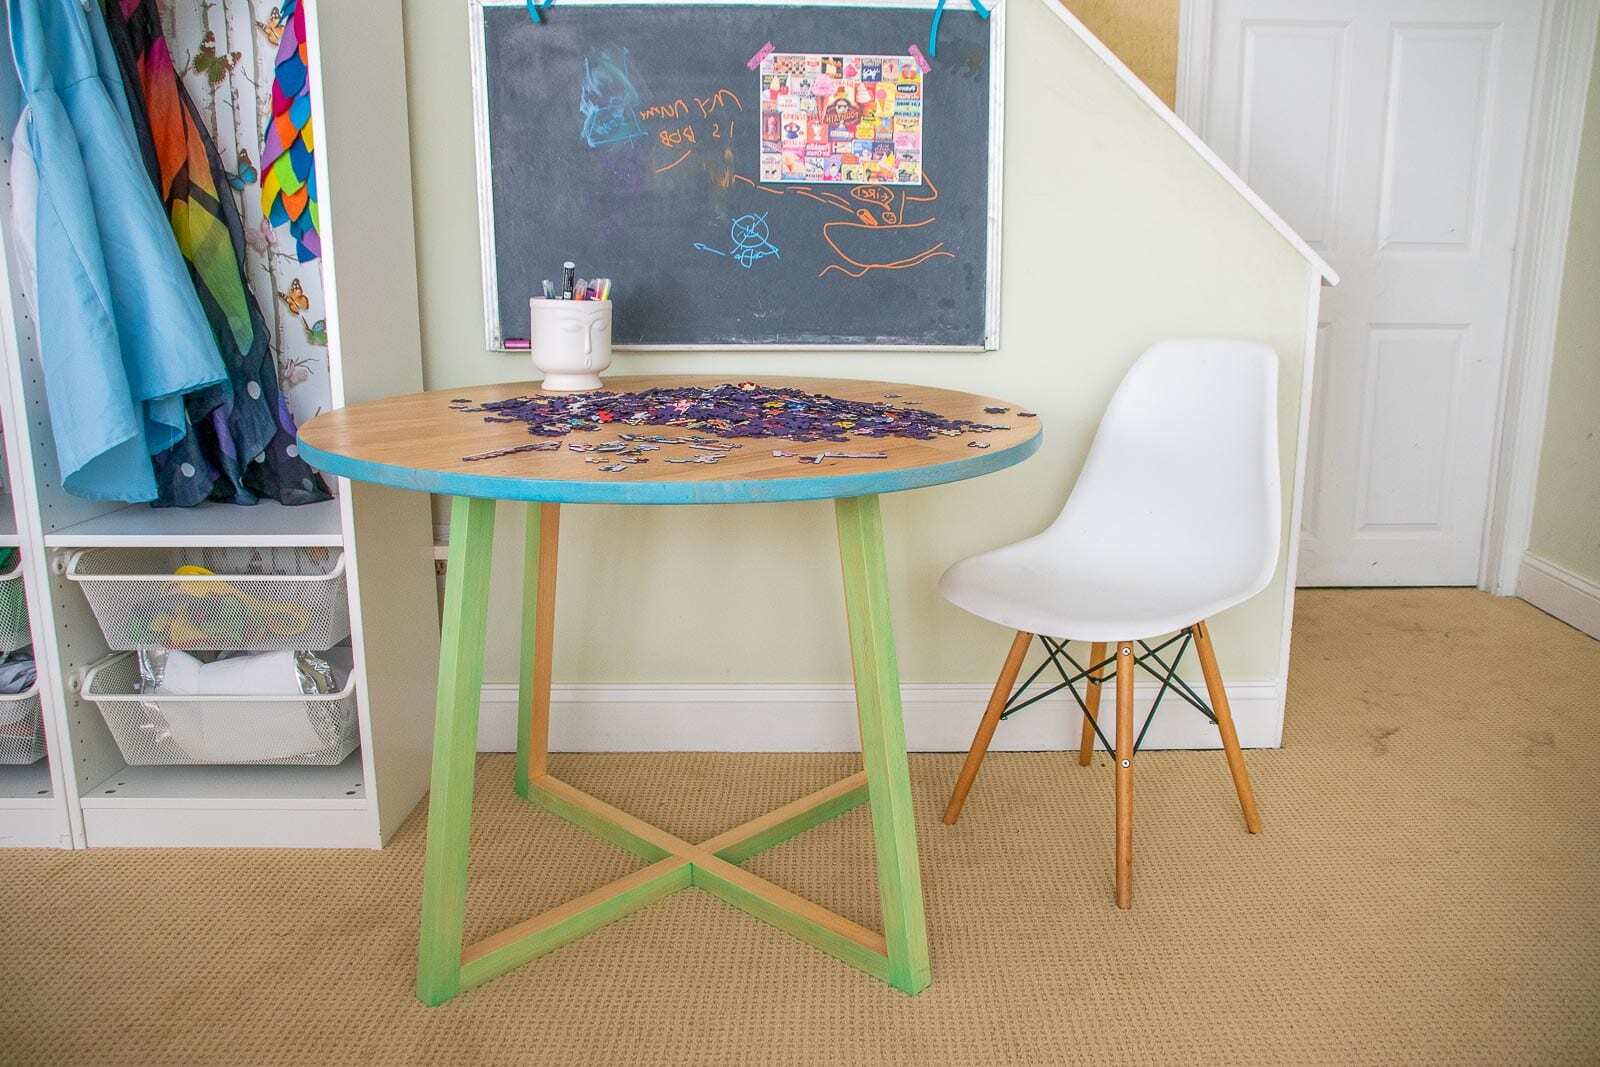 Dye Table DIY: Transform Your Furniture With Vibrant Colors